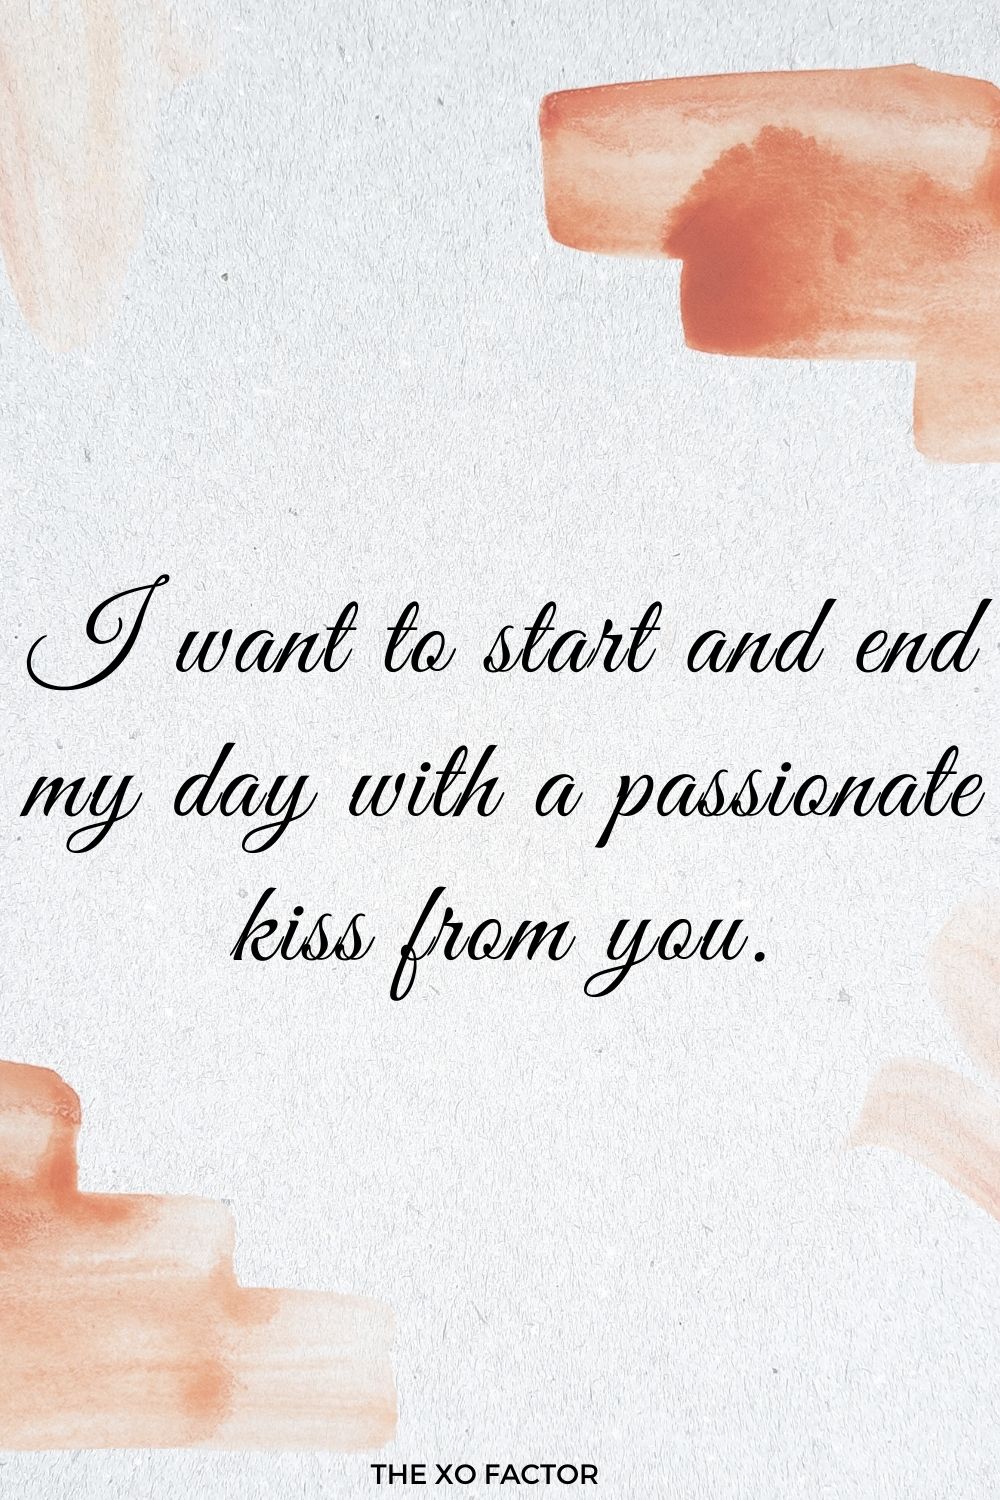 I want to start and end my day with a passionate kiss from you.